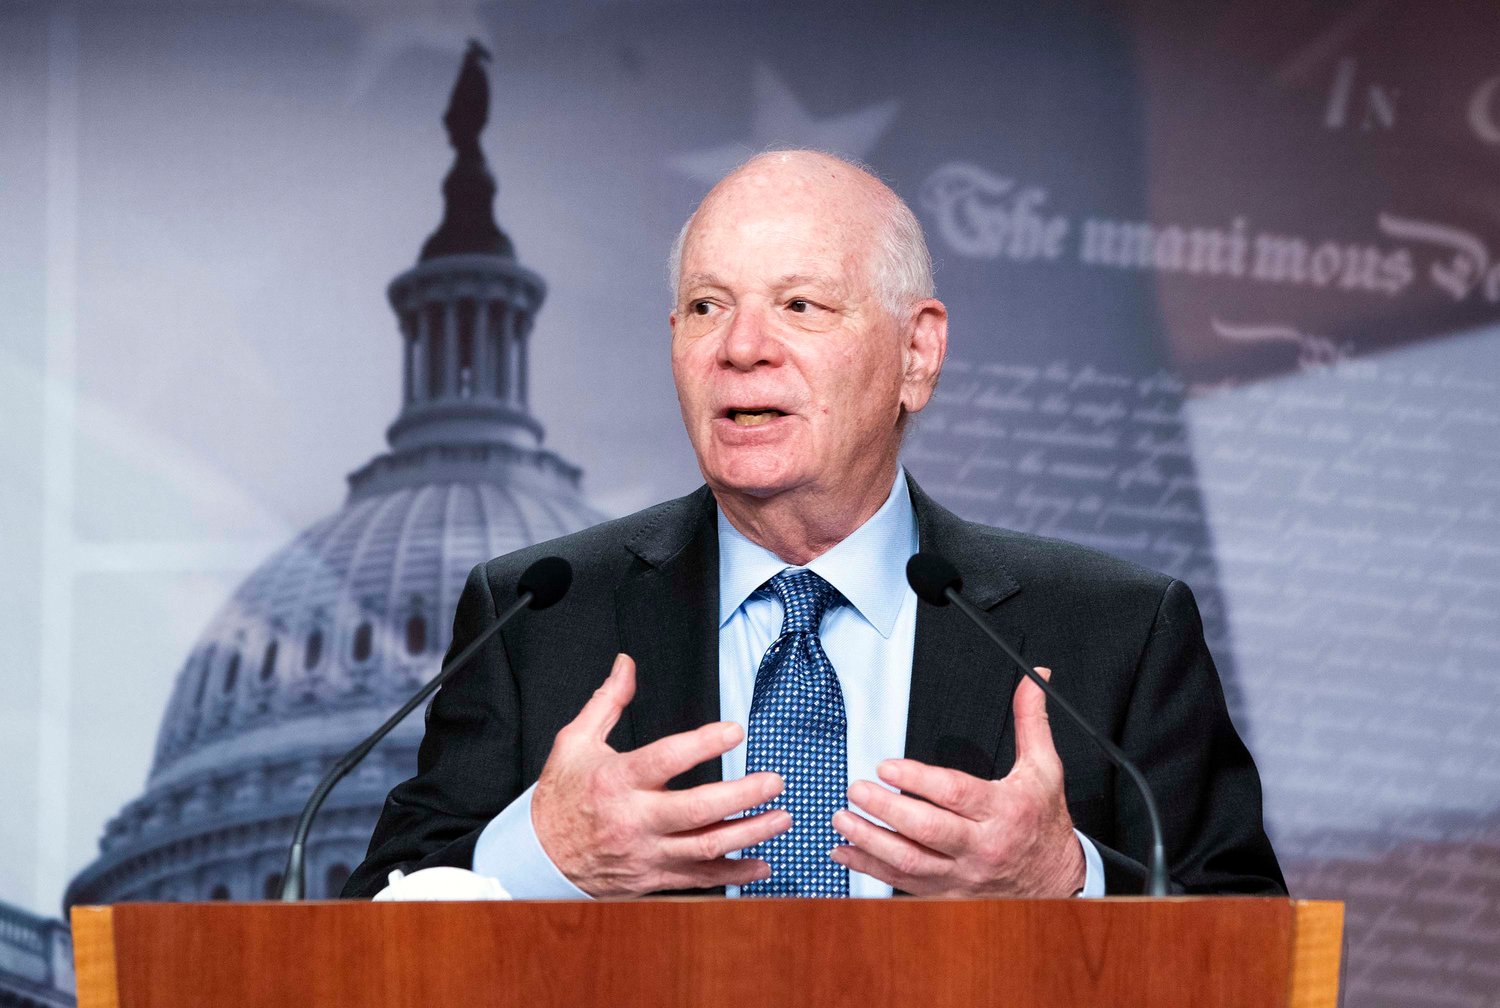 Sen. Ben Cardin (D-MD) speaks during a news conference on Capitol Hill on March 23, 2021, in Washington, D.C., calling for extended COIVD-19 financial relief for small businesses. (Kevin Dietsch/Pool/Getty Images/TNS)